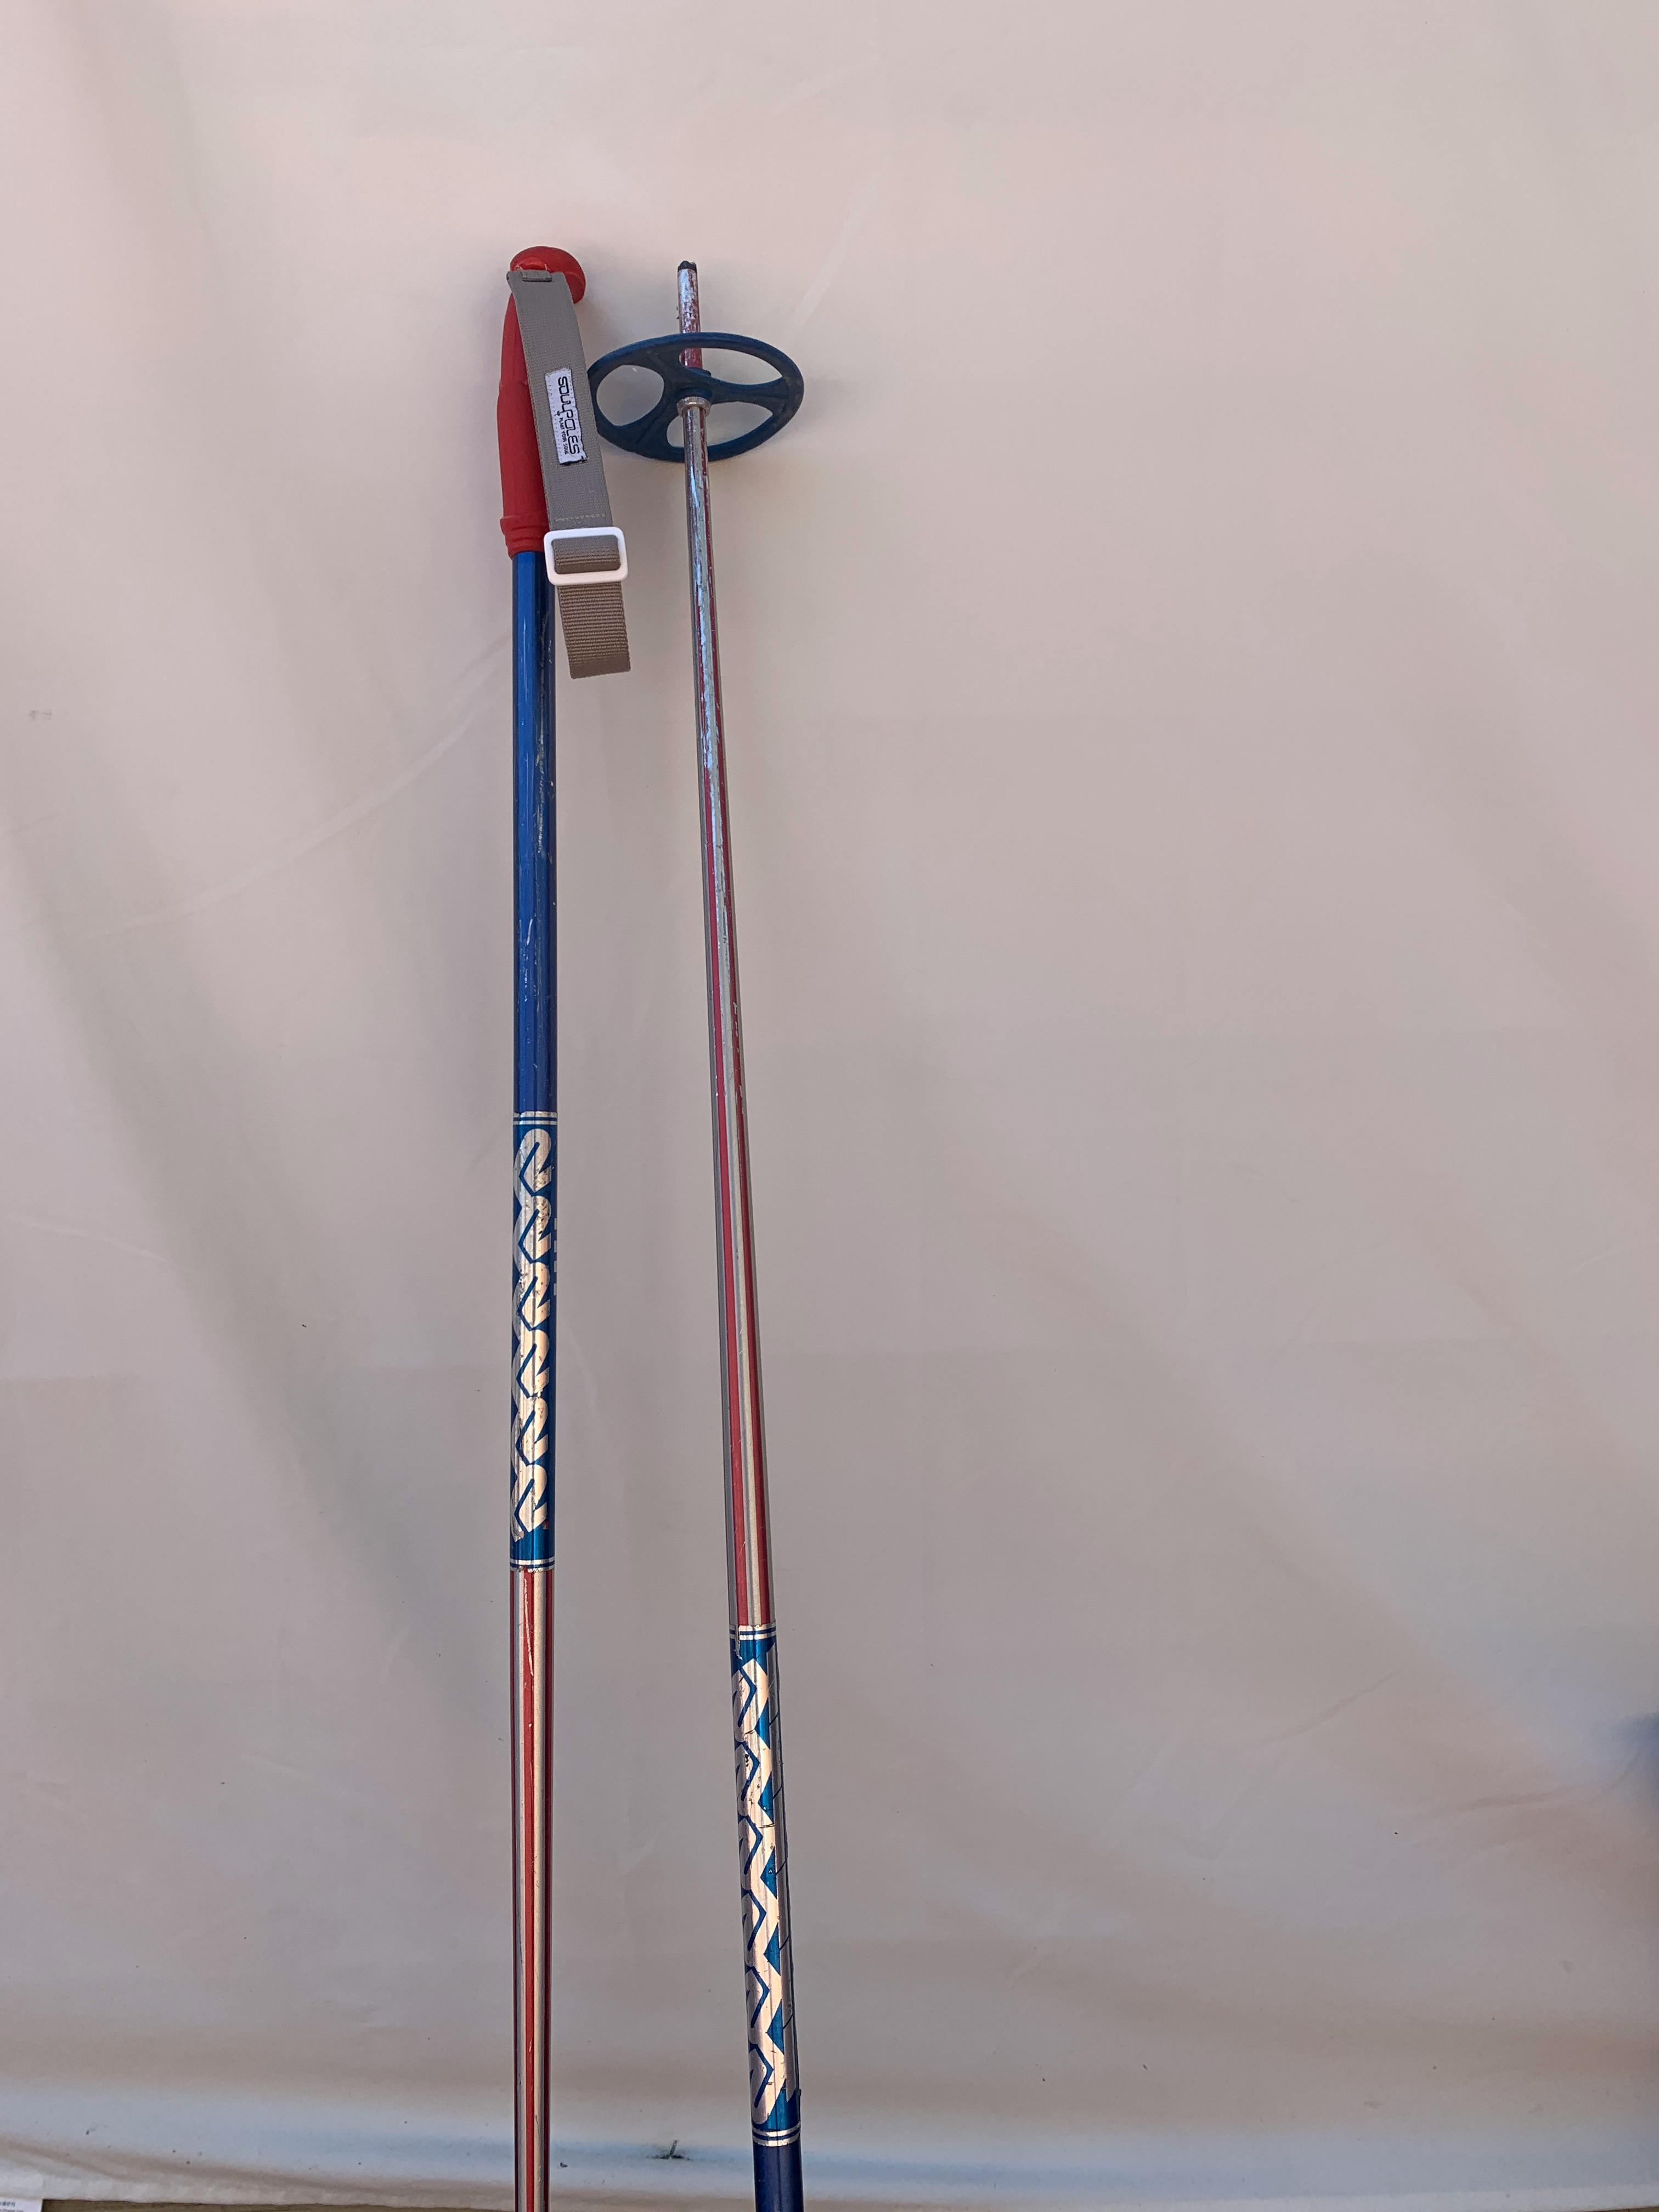 A pair of blue and red vintage ski poles